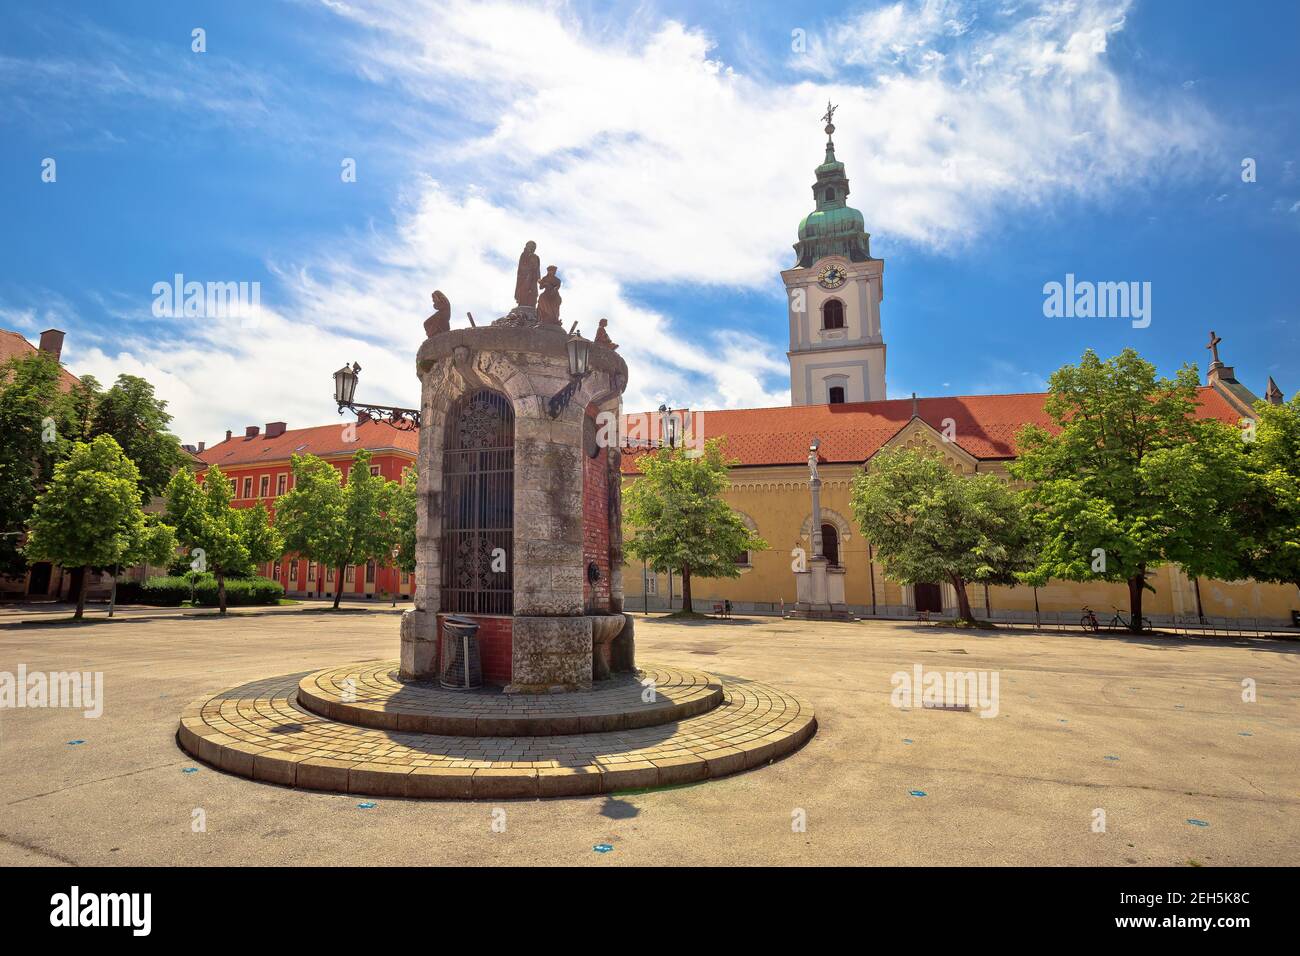 Town of Karlovac main square architecture view, central Croatia Stock Photo